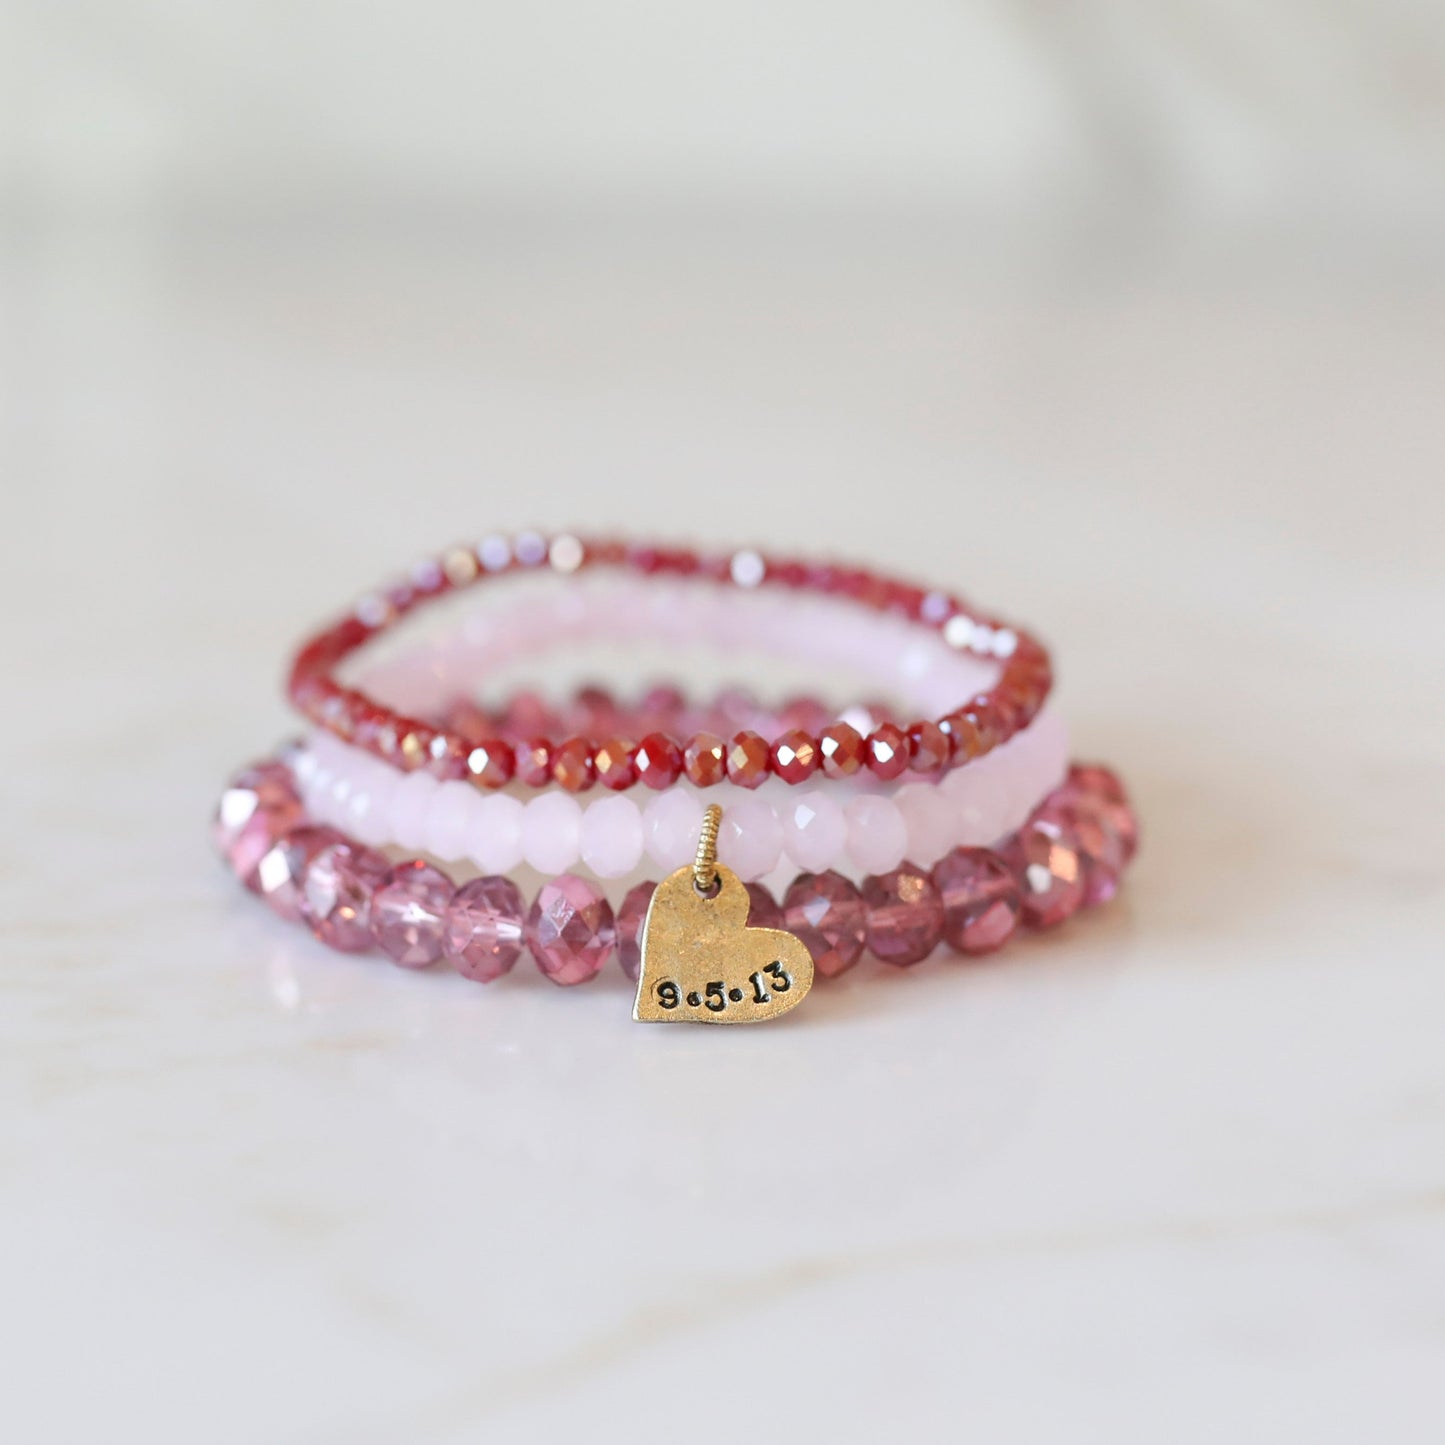 Anniversary Stack Bracelets with Crystal Beads - Pink Mix